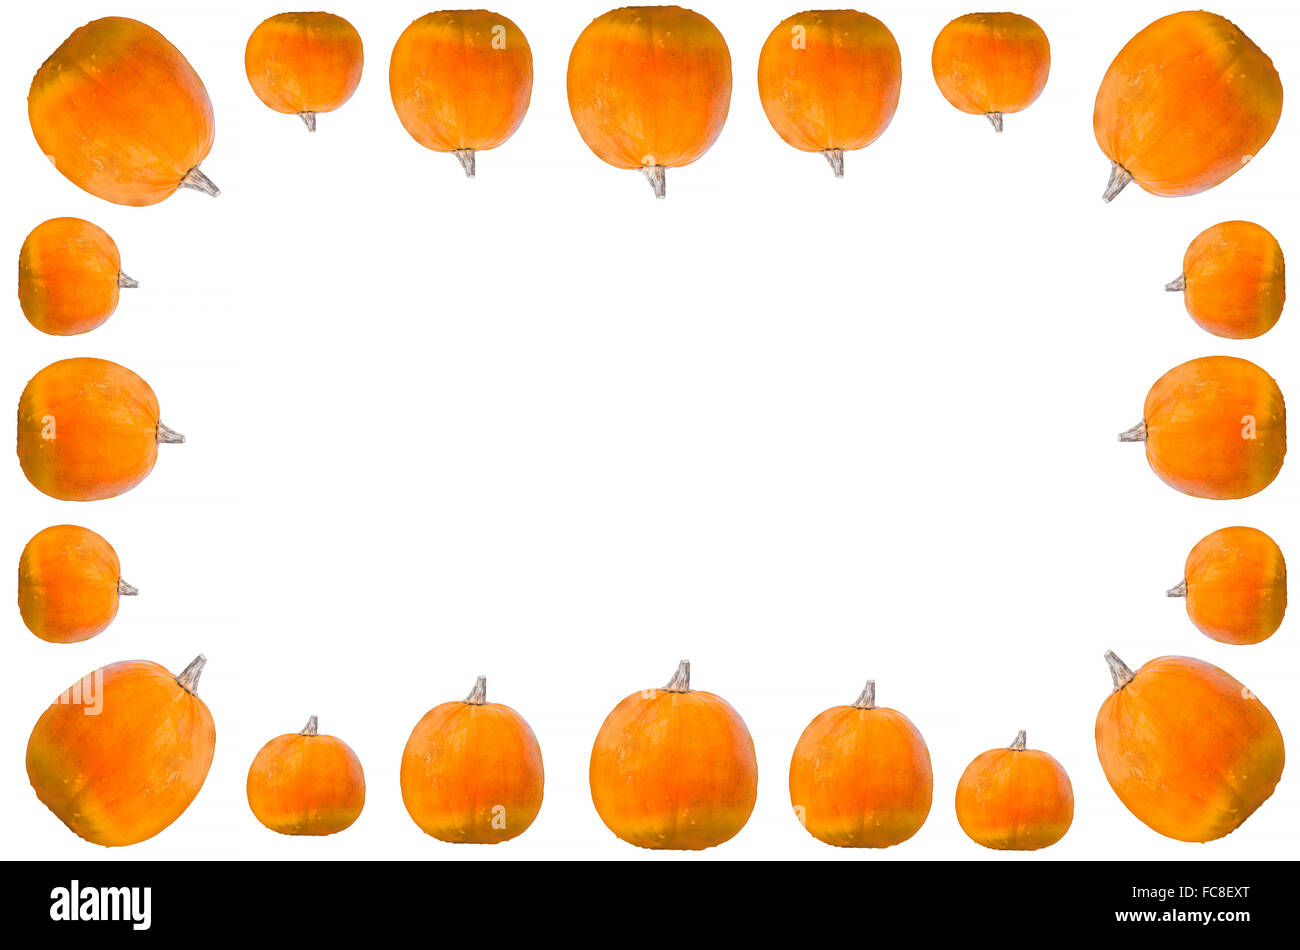 Frame with pumpkins Stock Photo